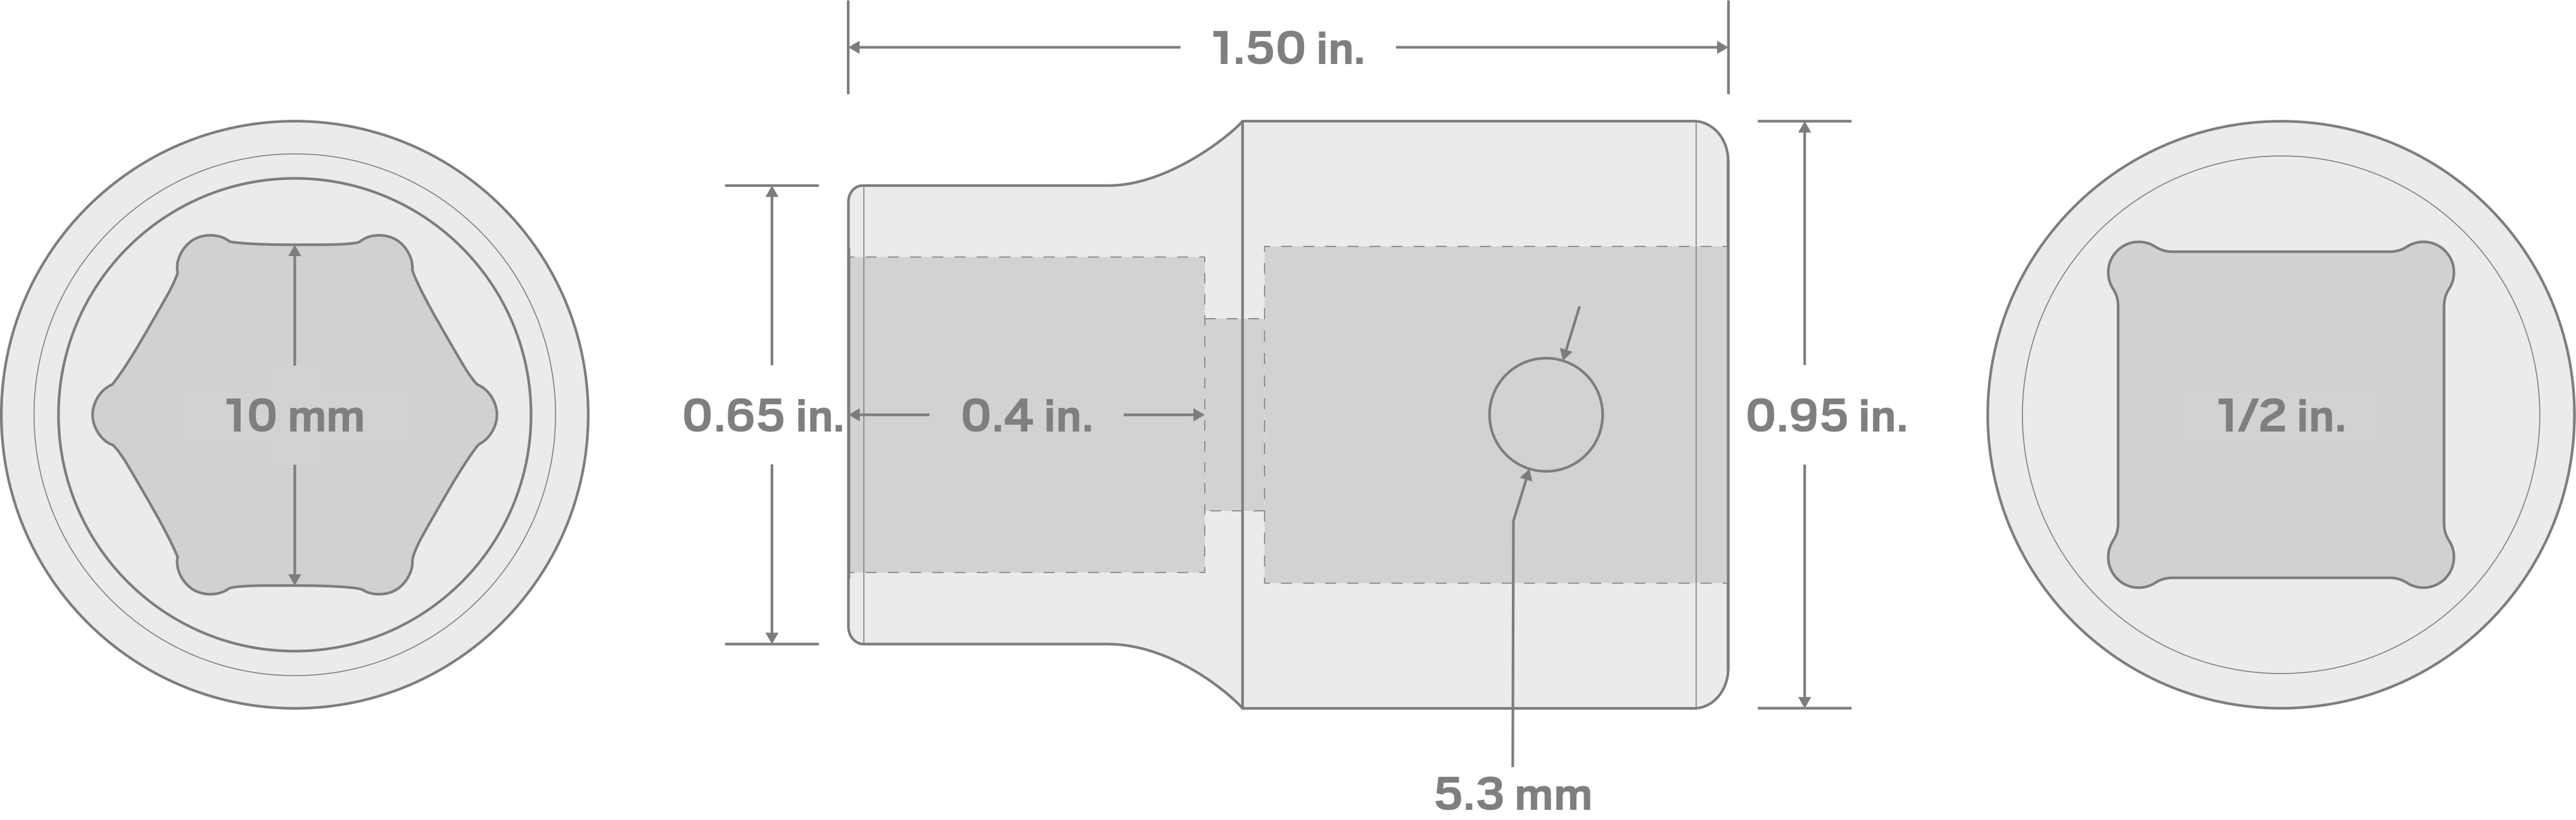 Specs for 1/2 Inch Drive x 10 mm 6-Point Impact Socket